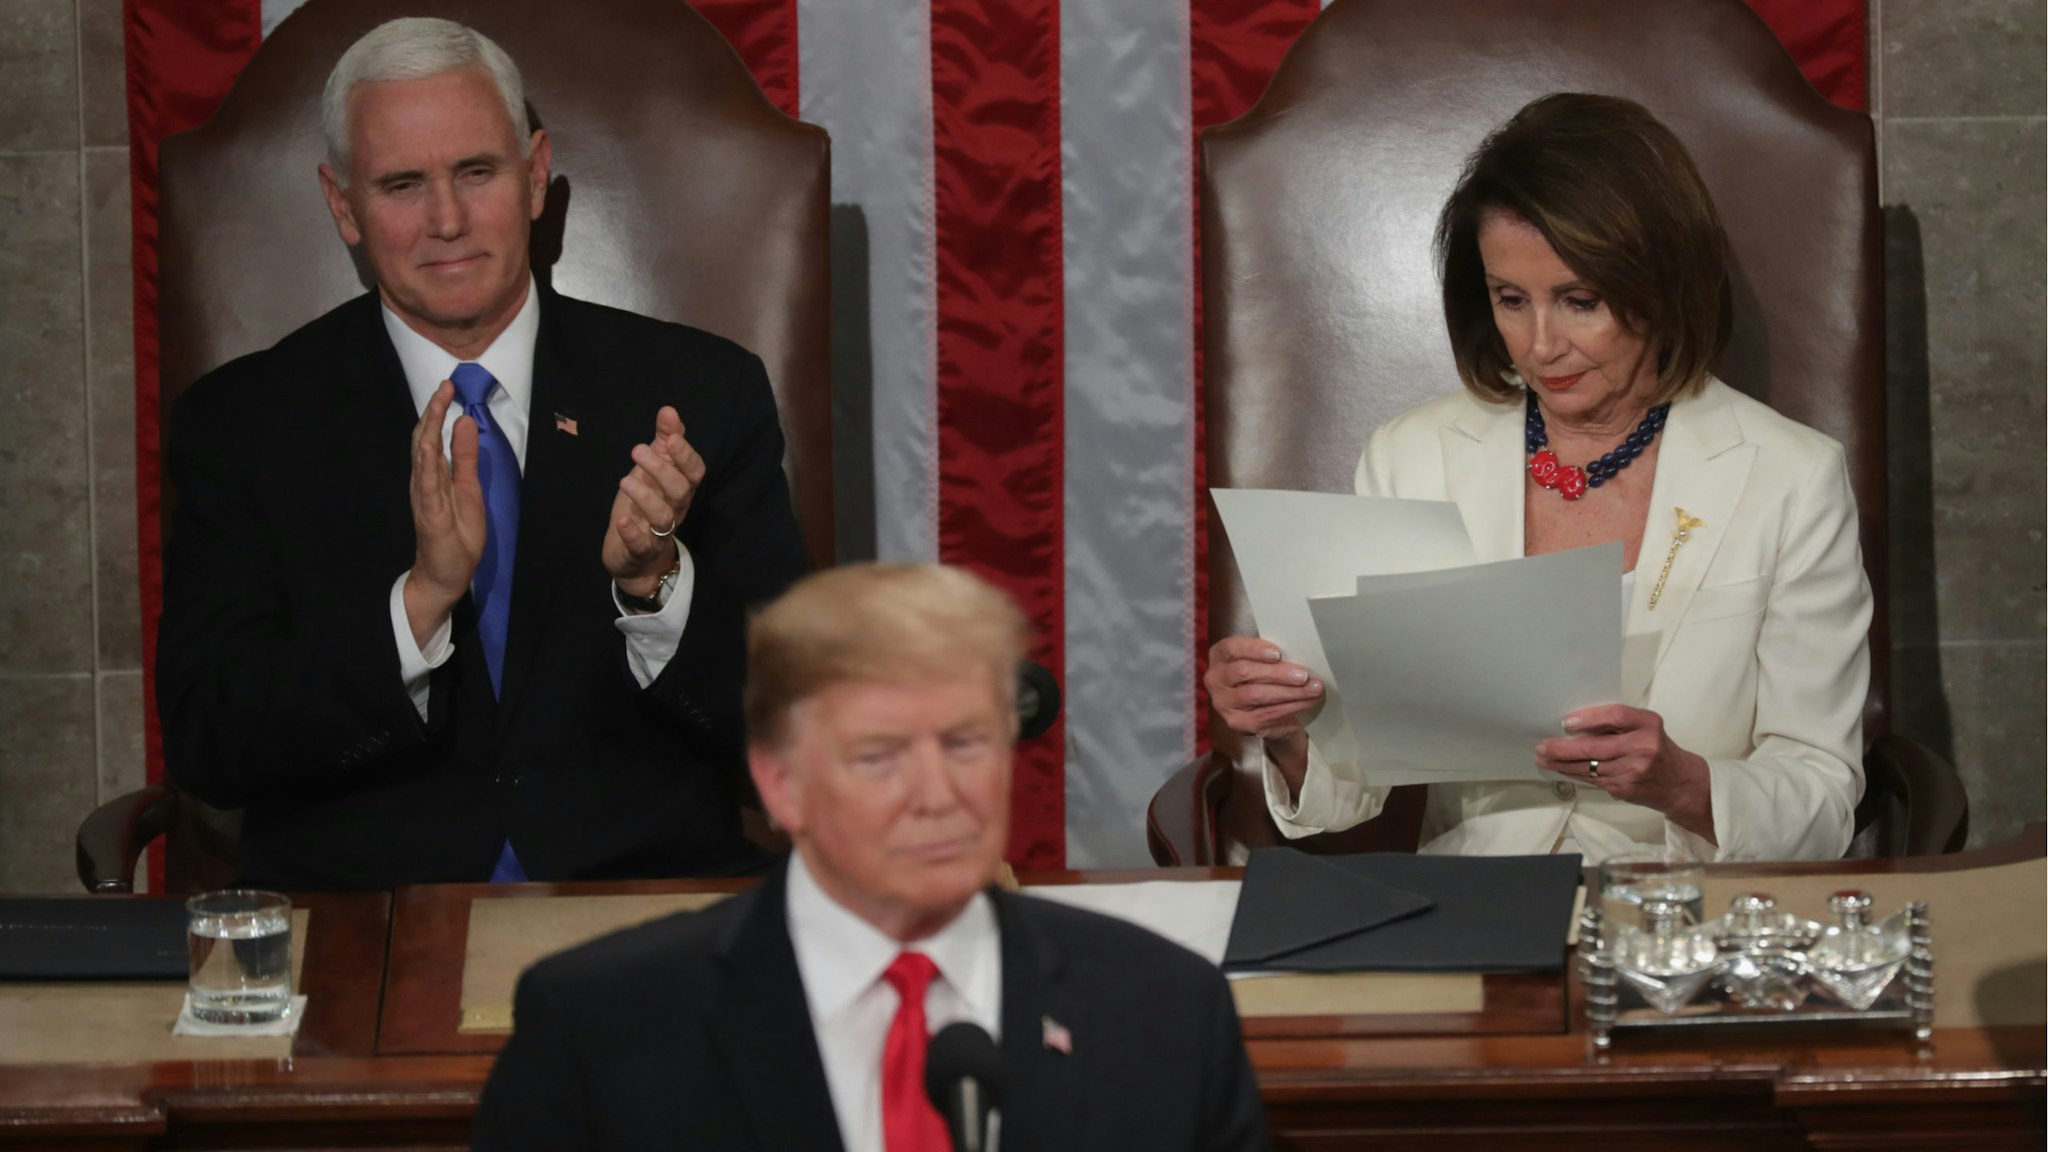 President Donald Trump, with Speaker Nancy Pelosi and Vice President Mike Pence looking on, delivers the State of the Union address in the chamber of the U.S. House of Representatives at the U.S. Capitol Building on February 5, 2019 in Washington, DC.